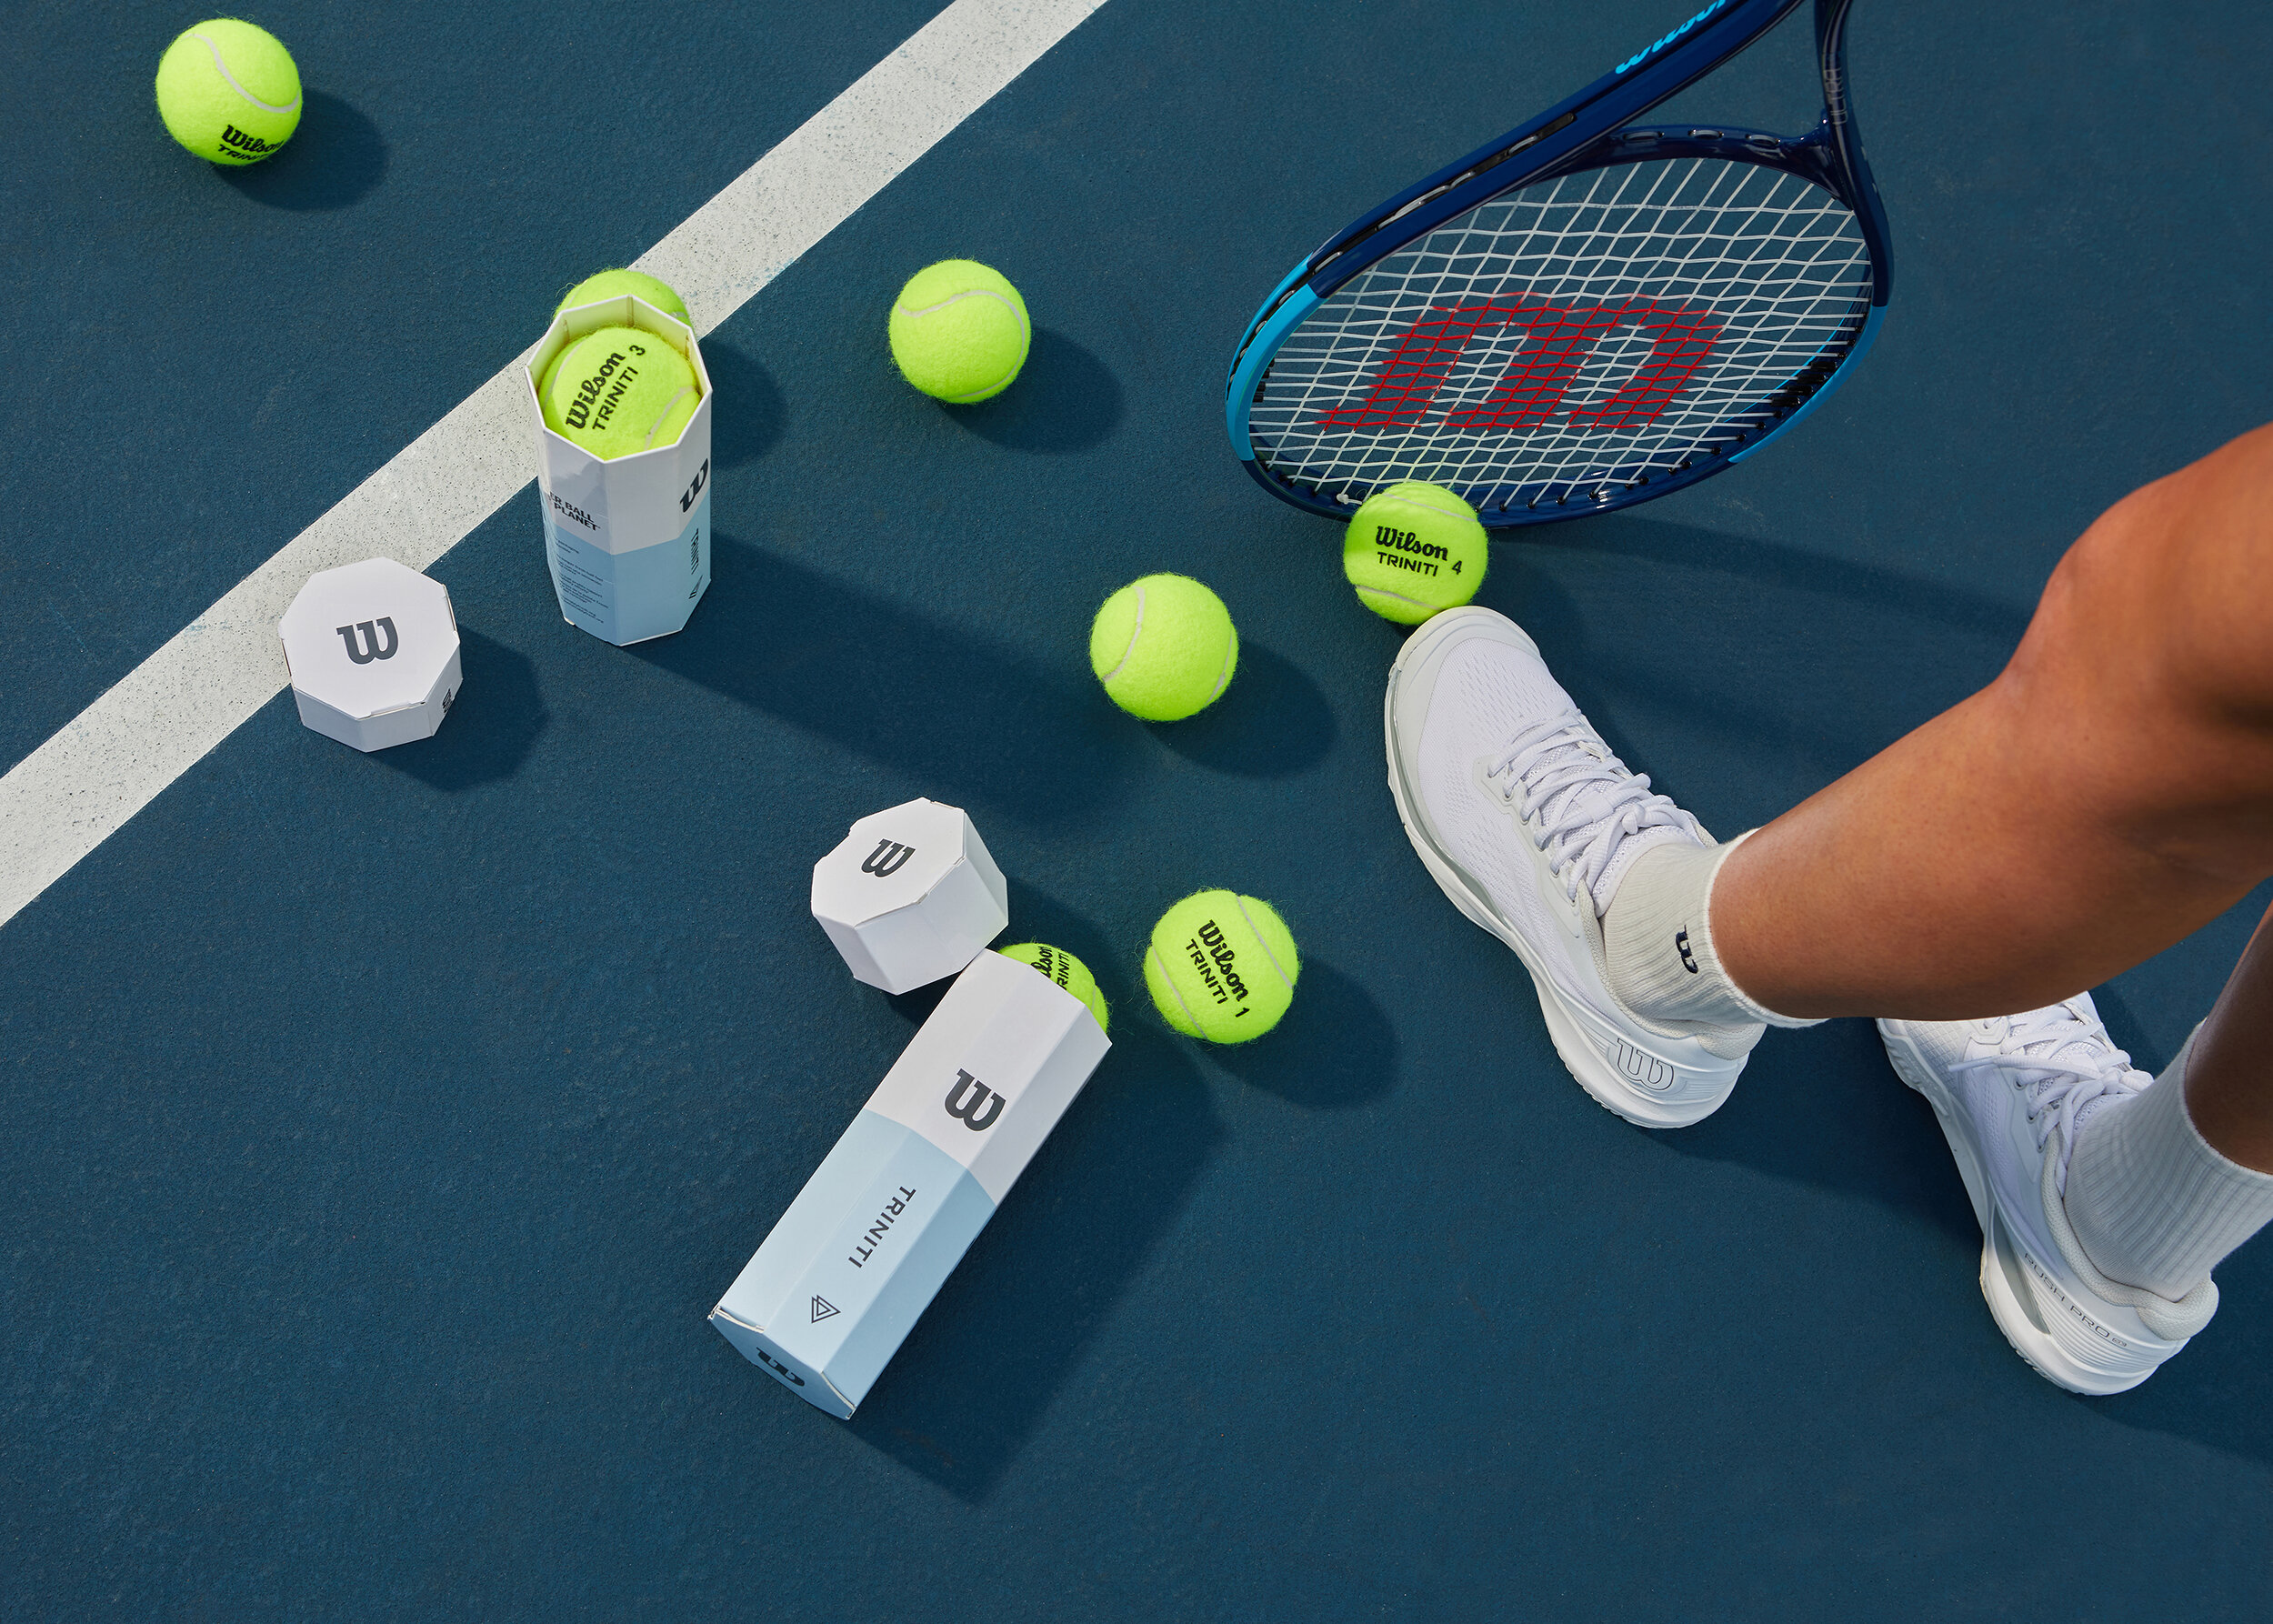 wilson-tennis-sports-advertising-photography-athleticwear-shoes-athletic-wear-athletics-balls-product-clothing-marketing-ad-6 (Copy)